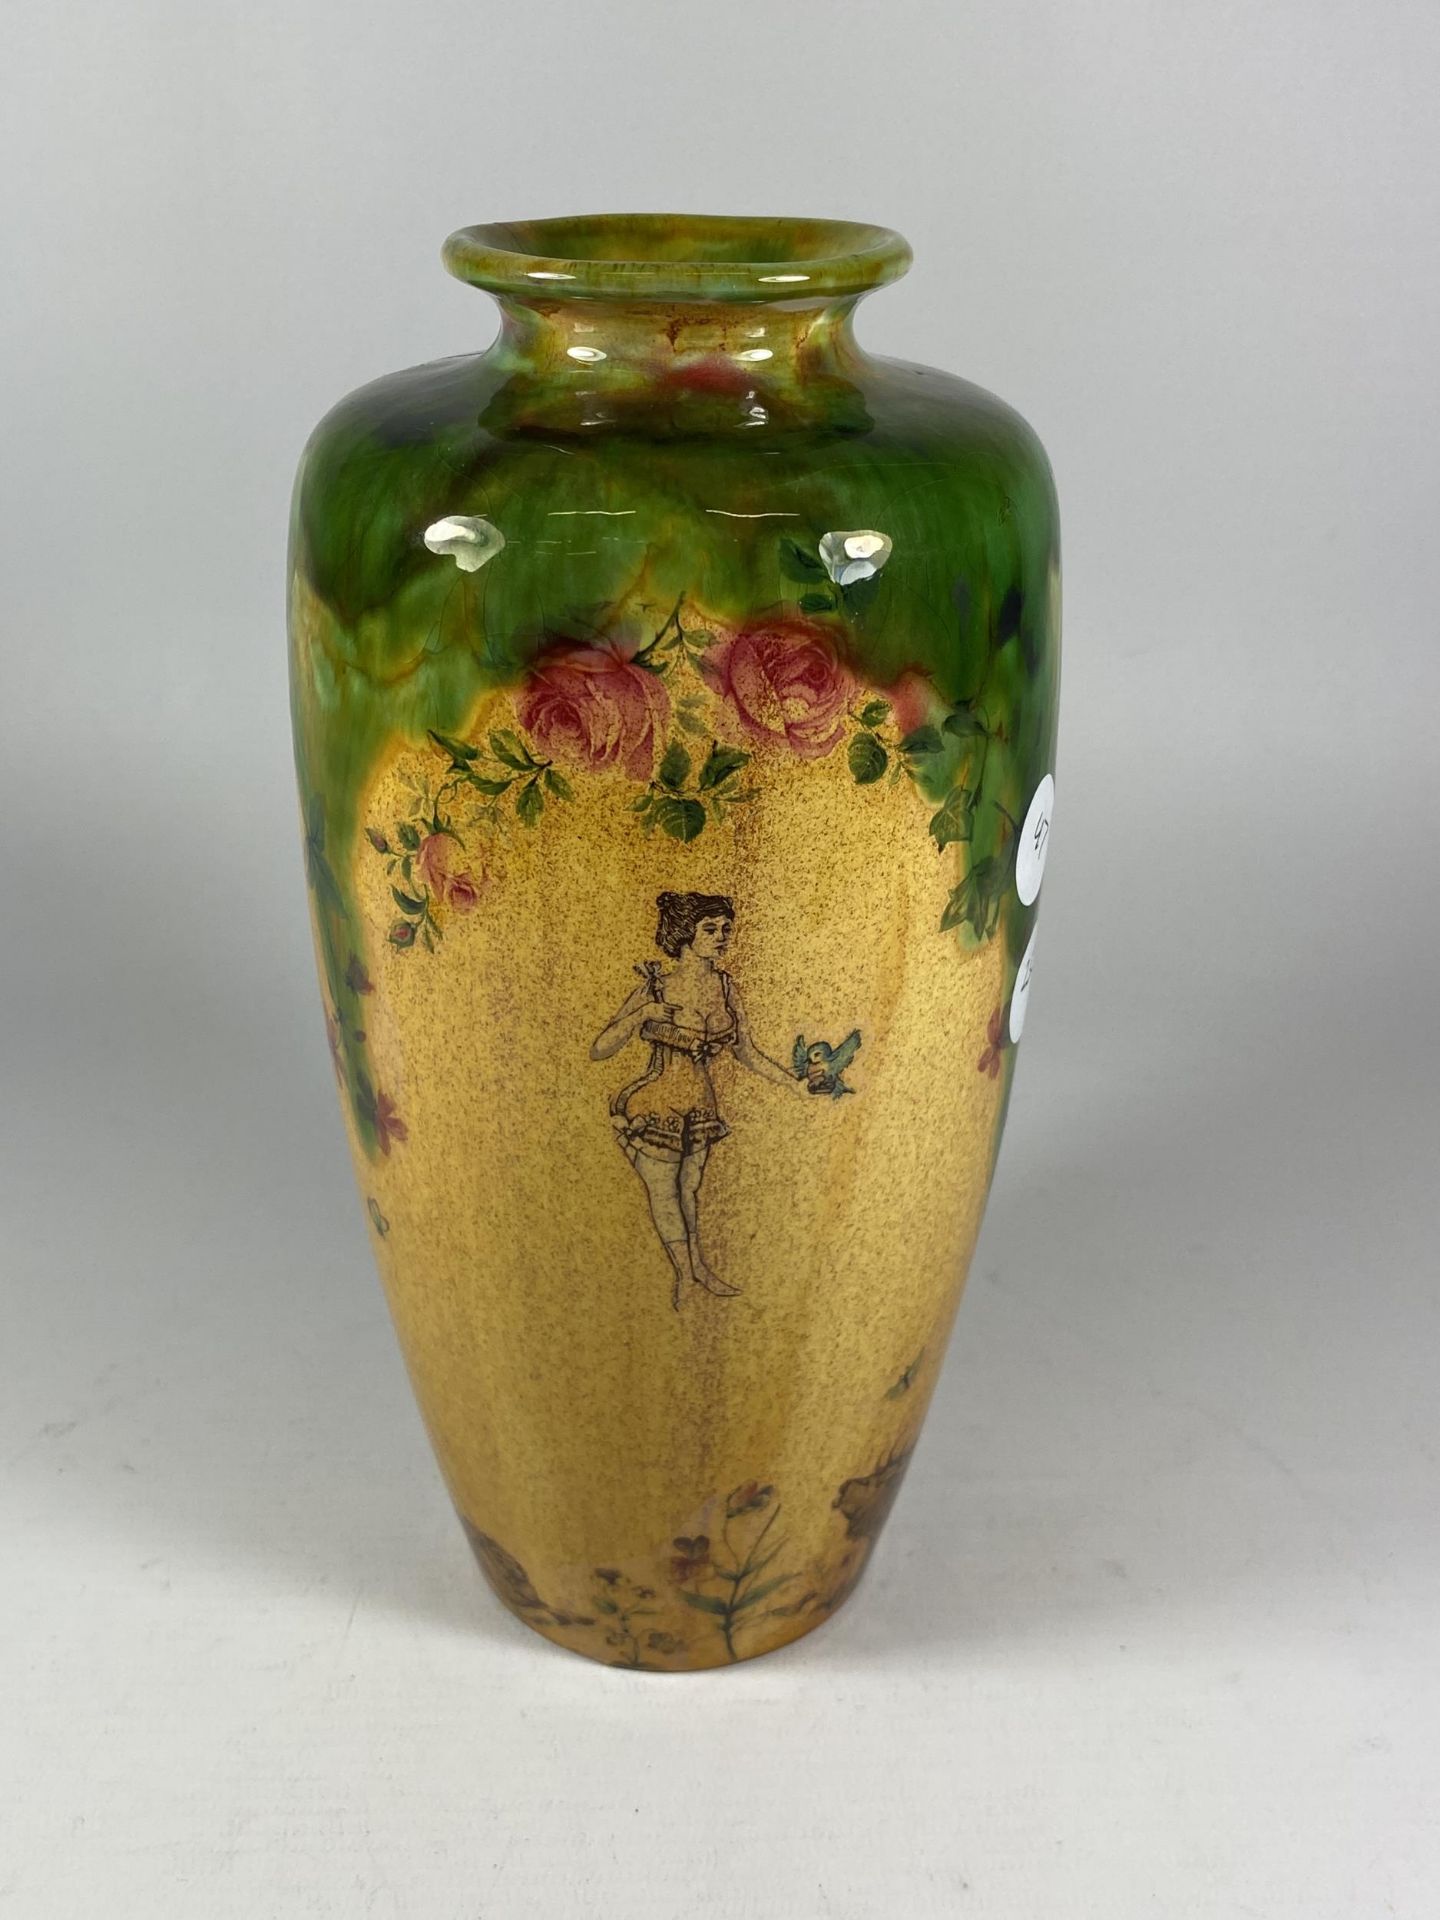 A VINTAGE LUSTRE STYLE YELLOW & GREEN DRIP VASE, SIGNED EVE - Image 2 of 3